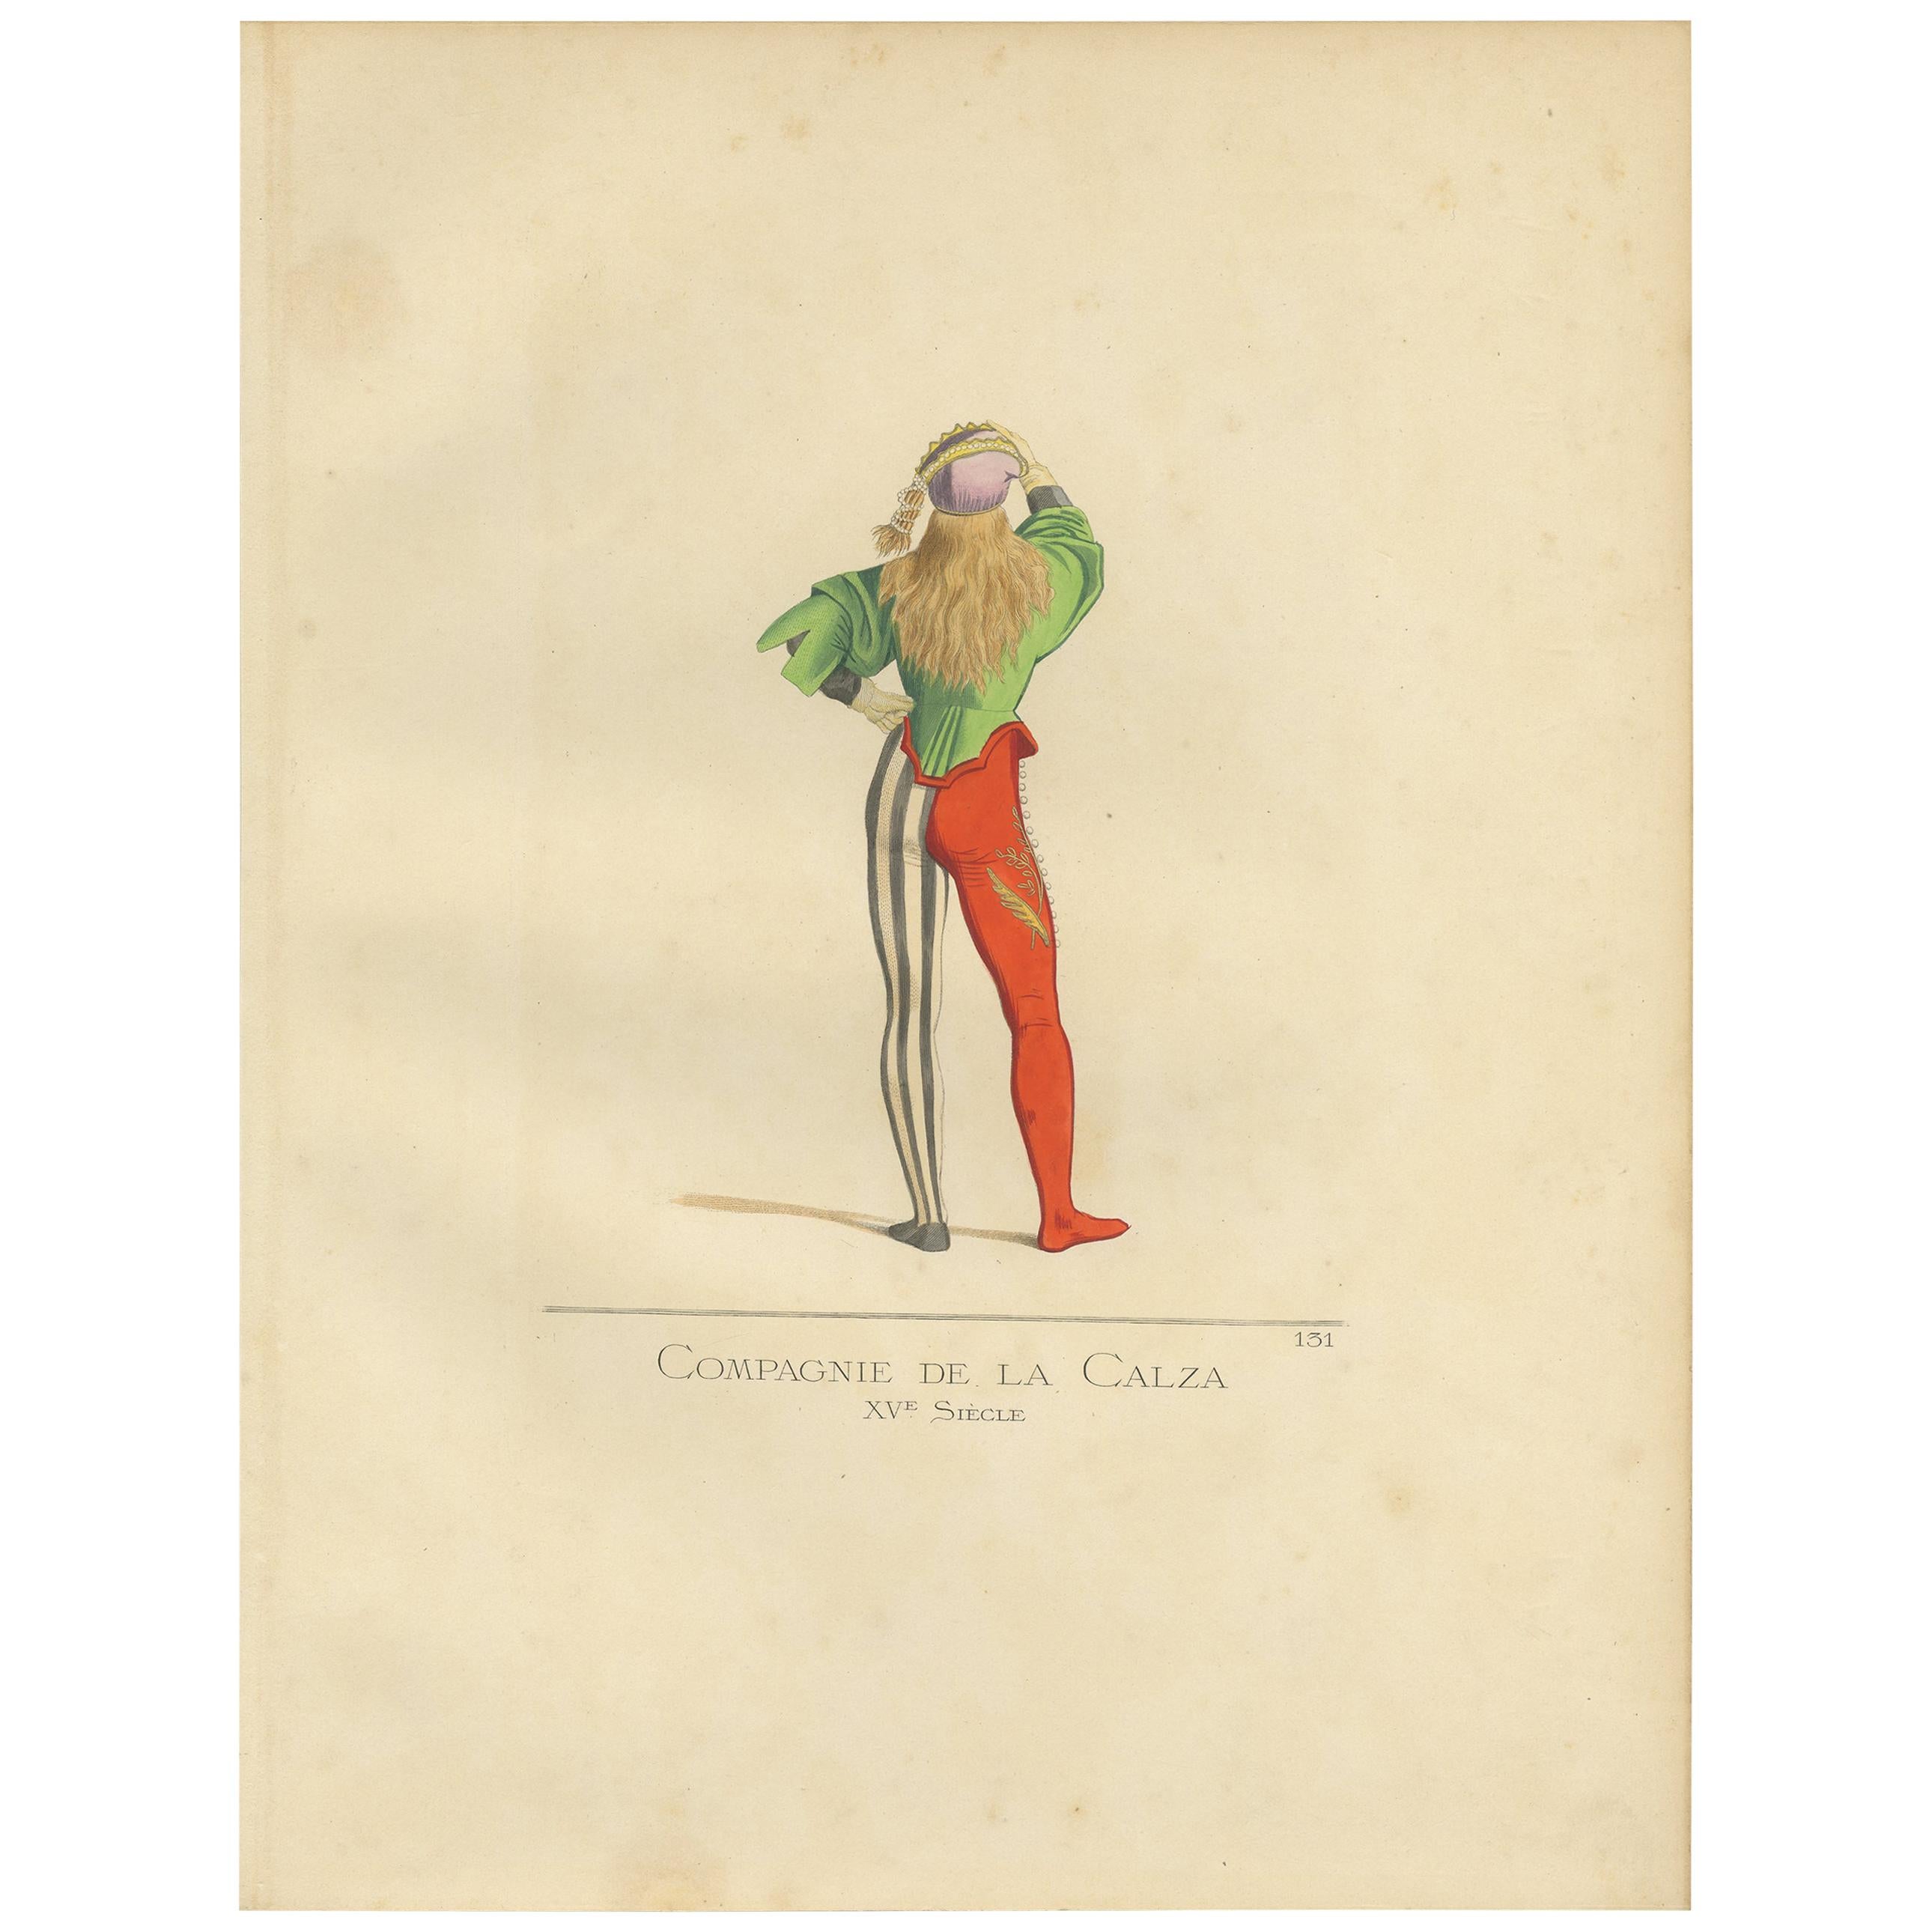 Antique Print of a Member of the Calza Society, 15th Century, by Bonnard, 1860